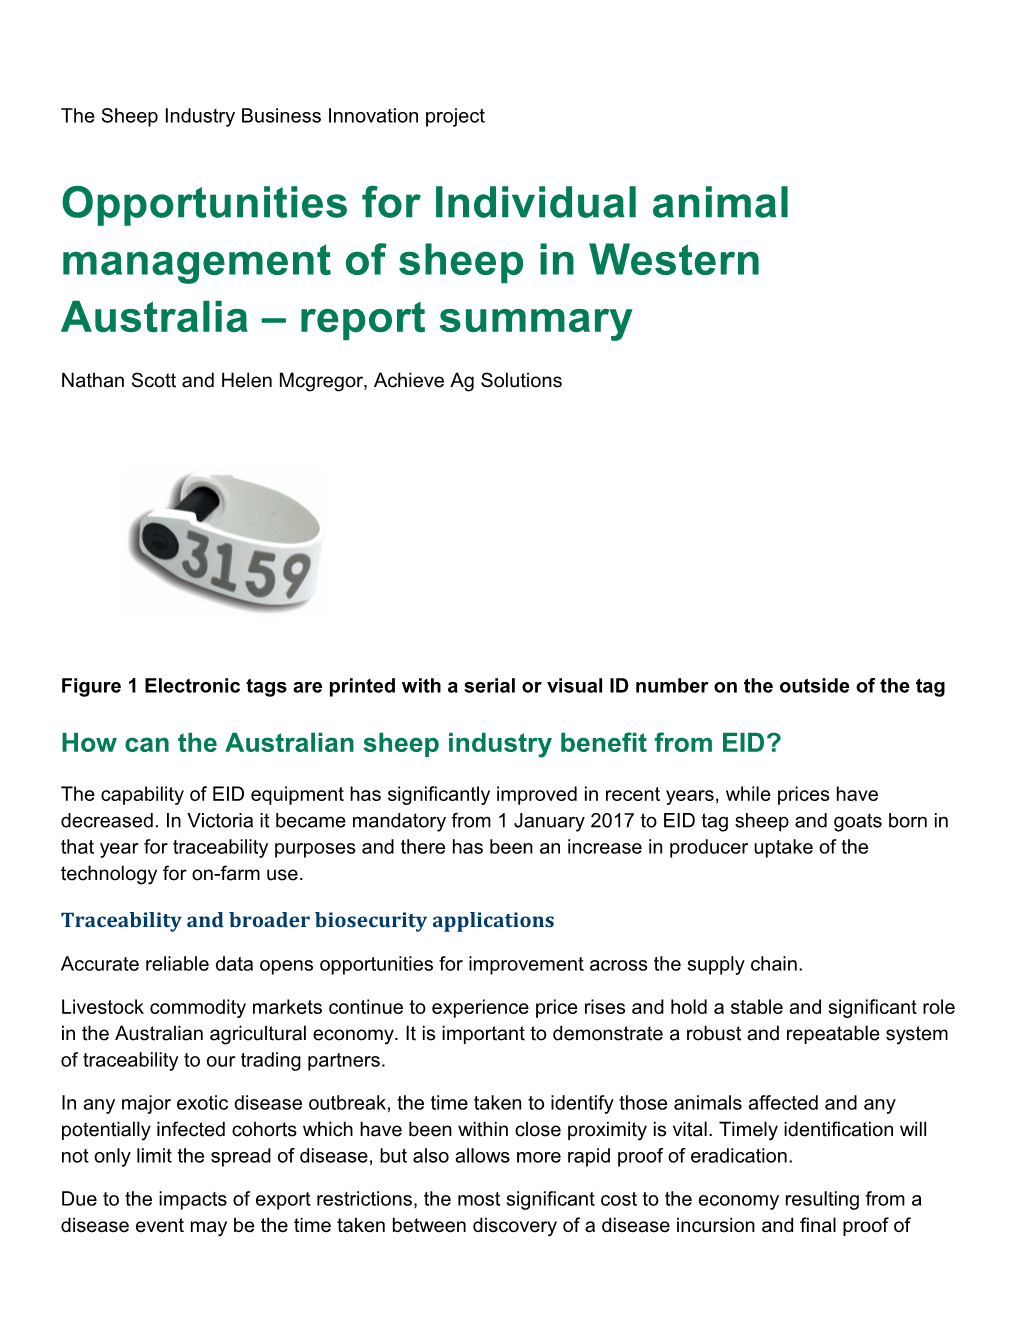 Forward Supply Contracts for the Western Australian Sheep Meat Sector